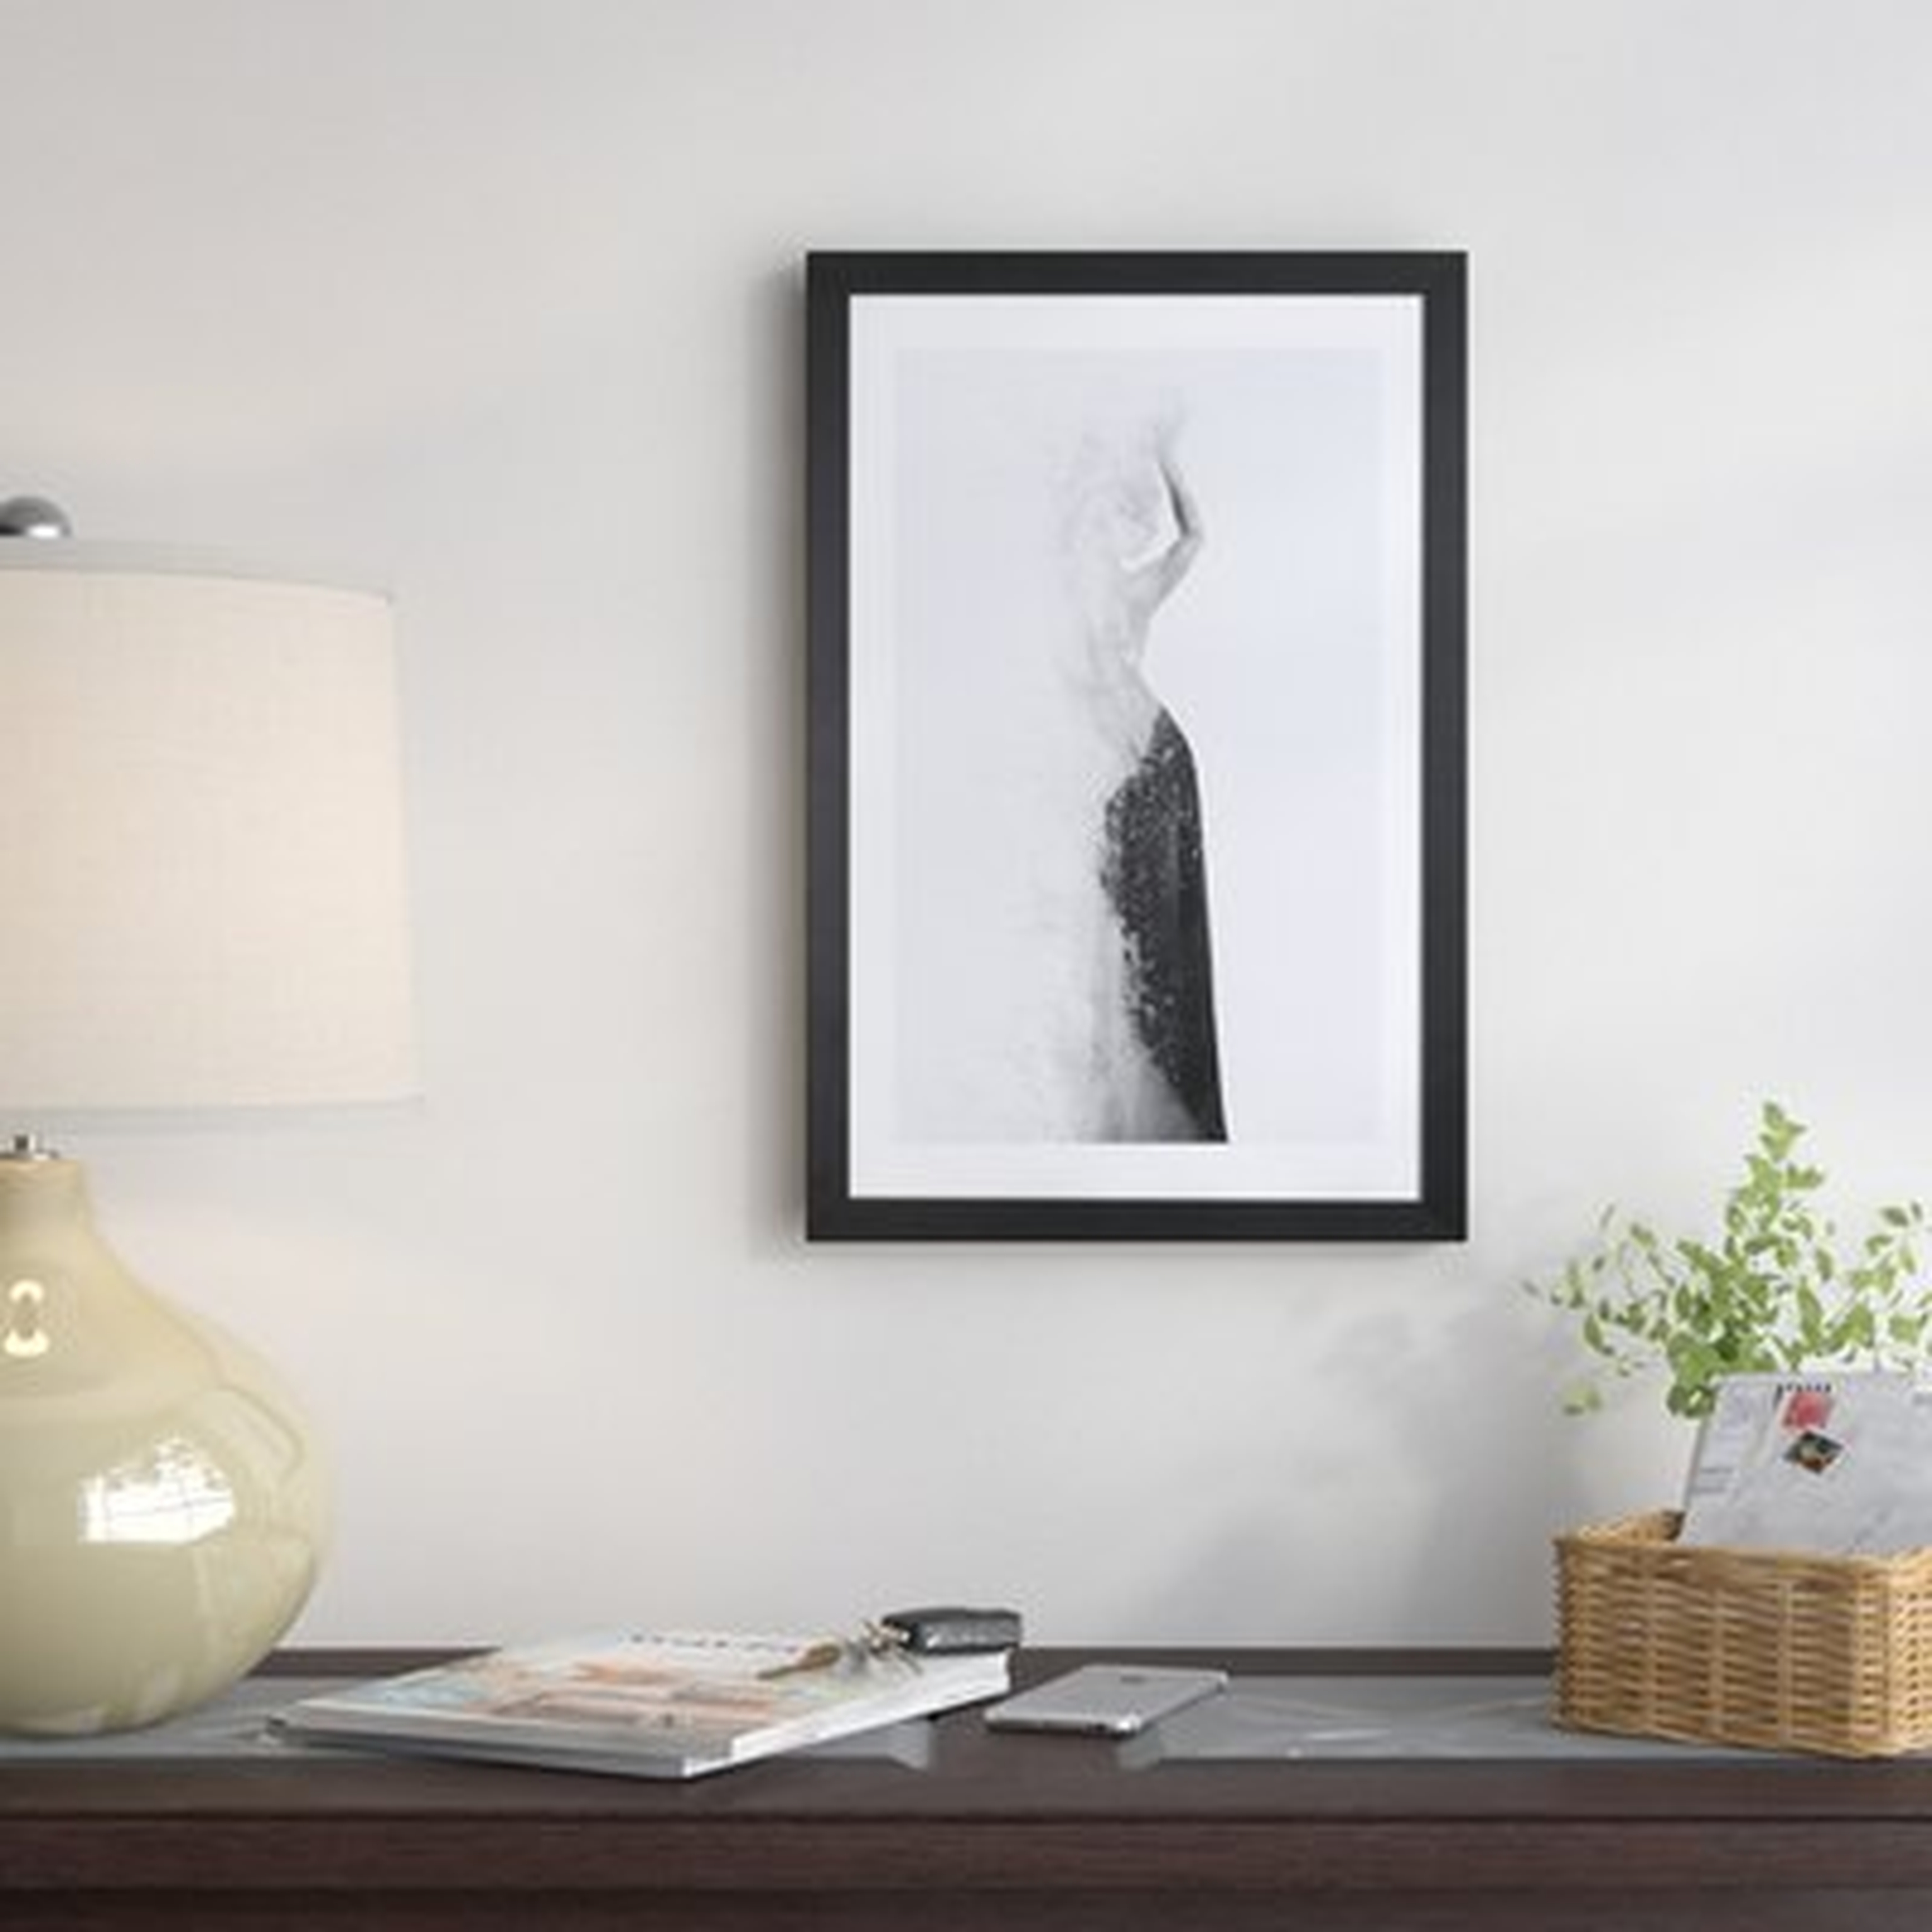 Inconspicuousness II by Dániel Taylor - Picture Frame Photograph Print on Canvas - AllModern